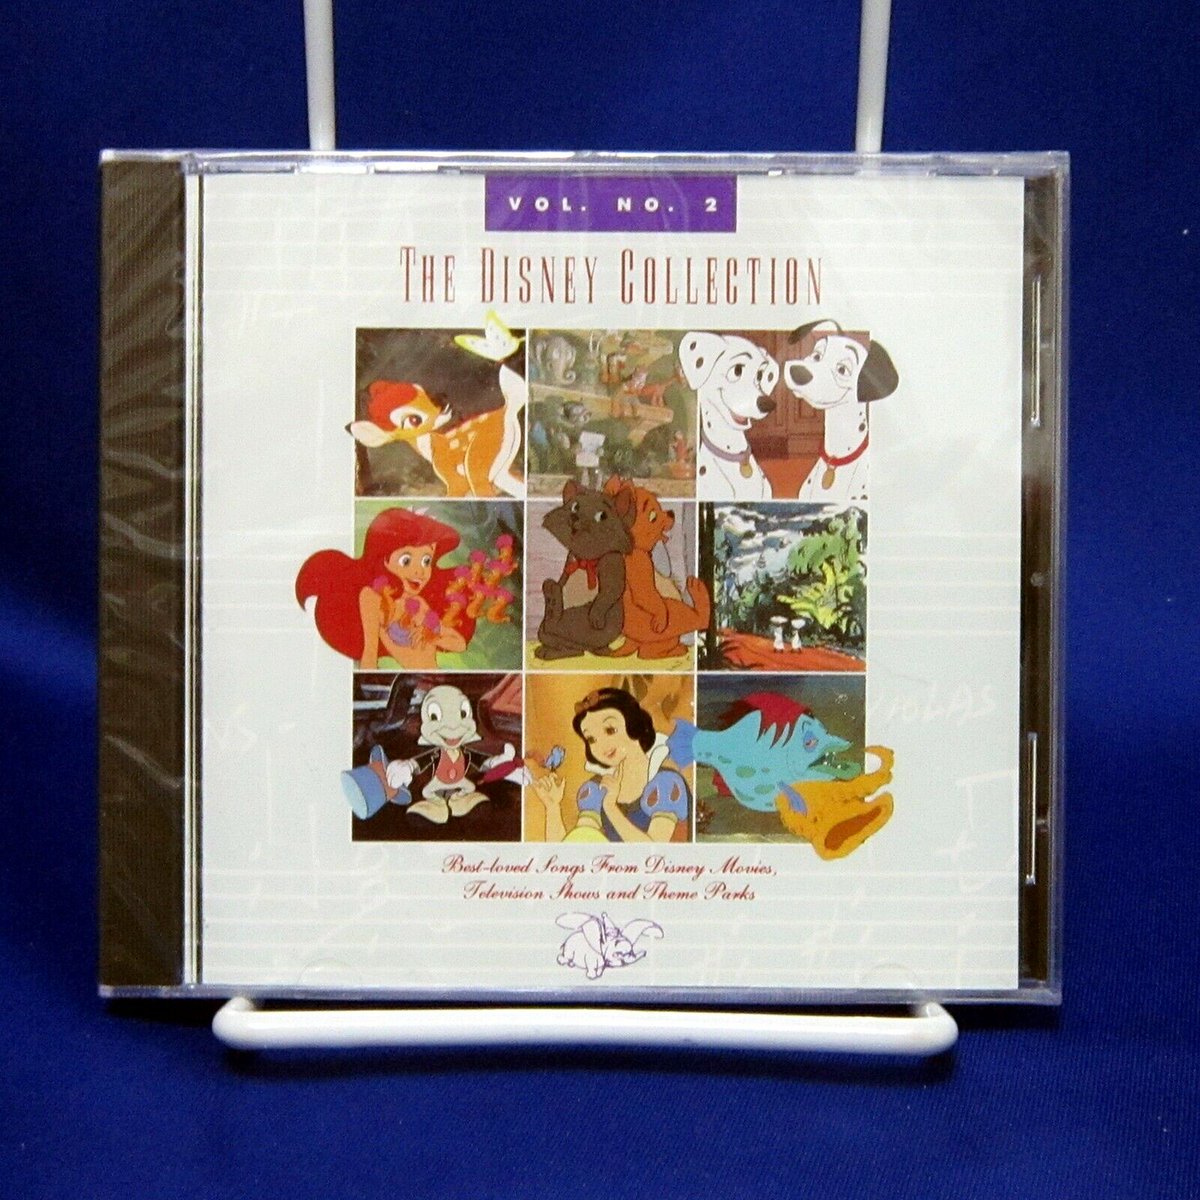 Thrifty Girl The Disney Collection Volume No 2 Cd New And Sealed Walt Disney Records T Co Erx2vyz4o0 Ebay Ebay Disney Waltdisney Thedisneycollection Disneycollection Volume2 Cd New Sealed Waltdisneyrecords Records